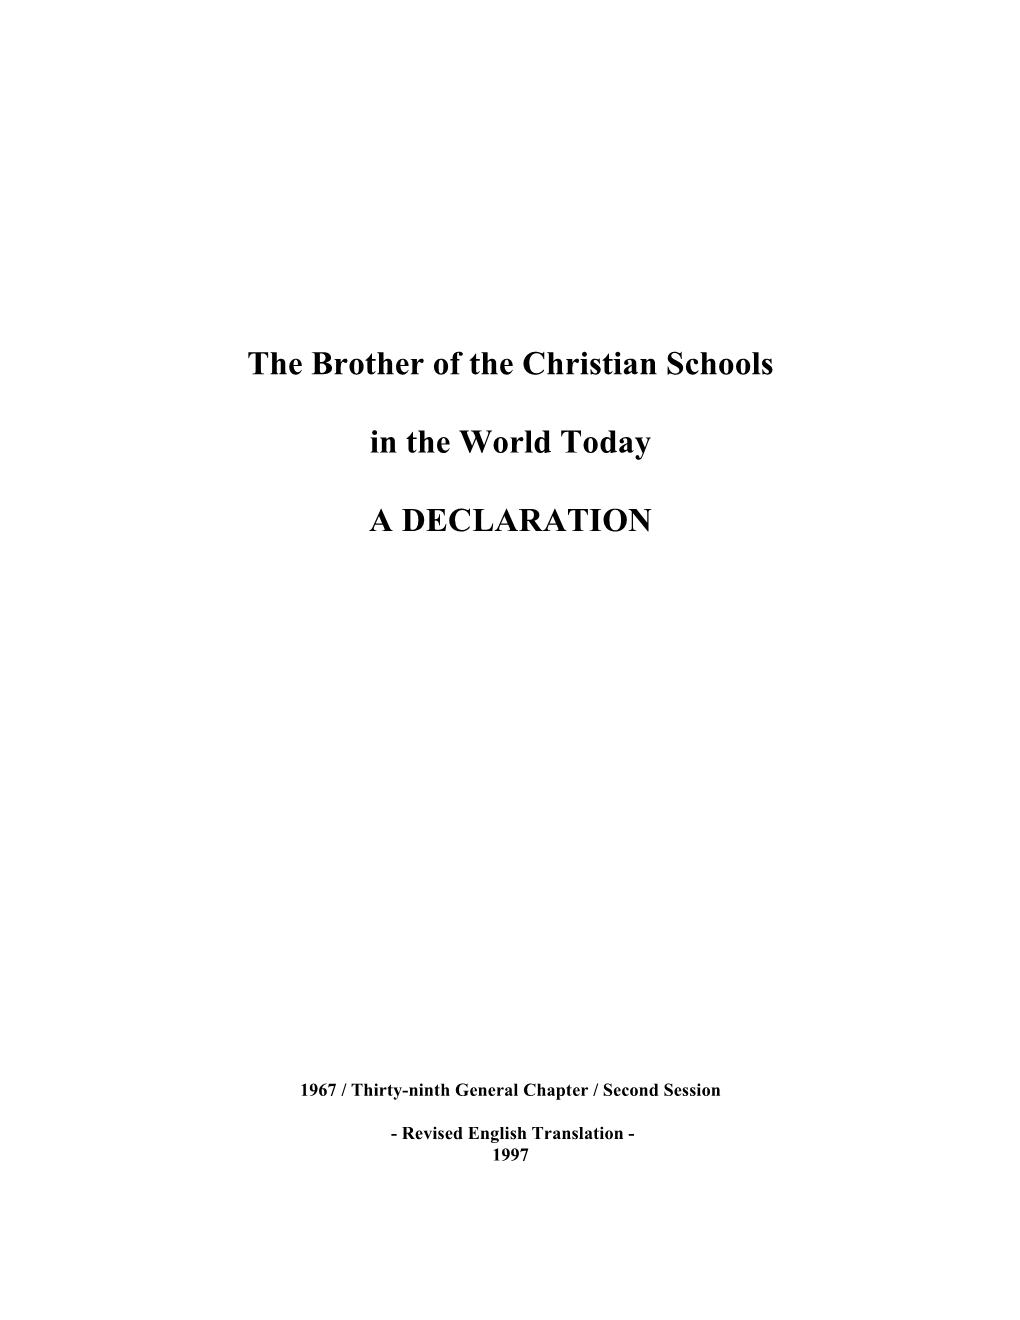 The Brother of the Christian Schools in the World Today a DECLARATION